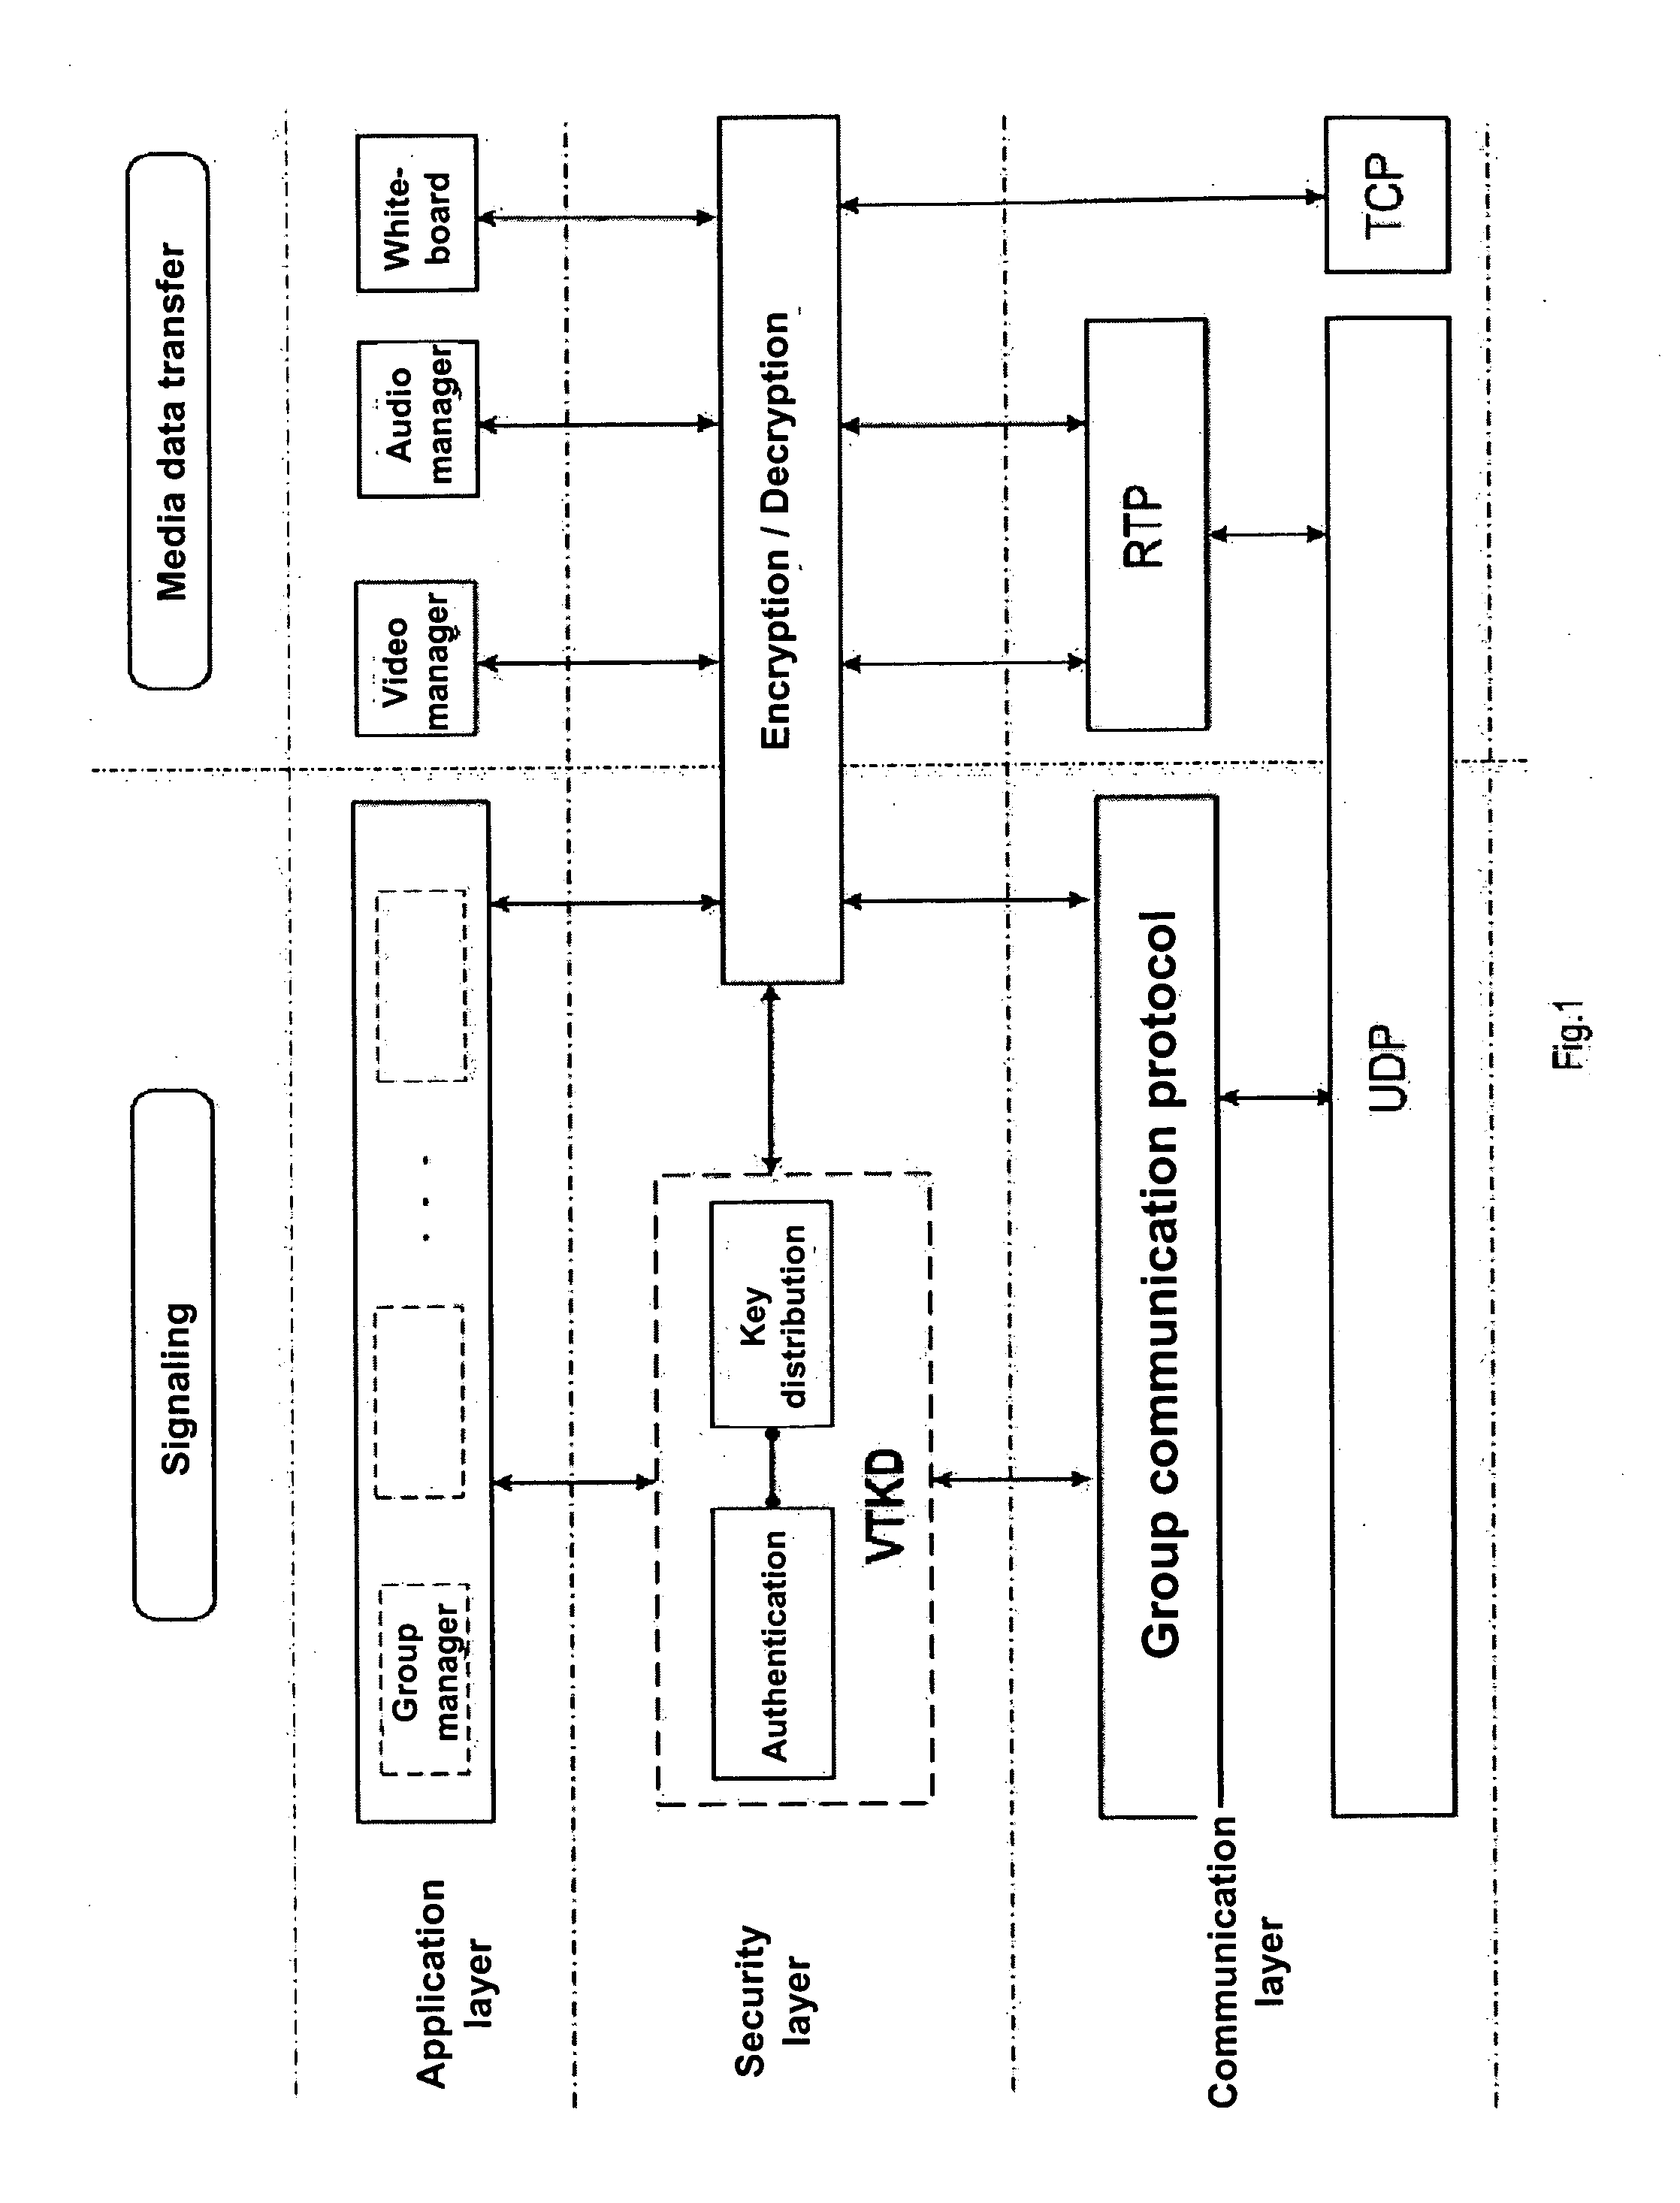 Method for changing a group key in a group of network elements in a network system